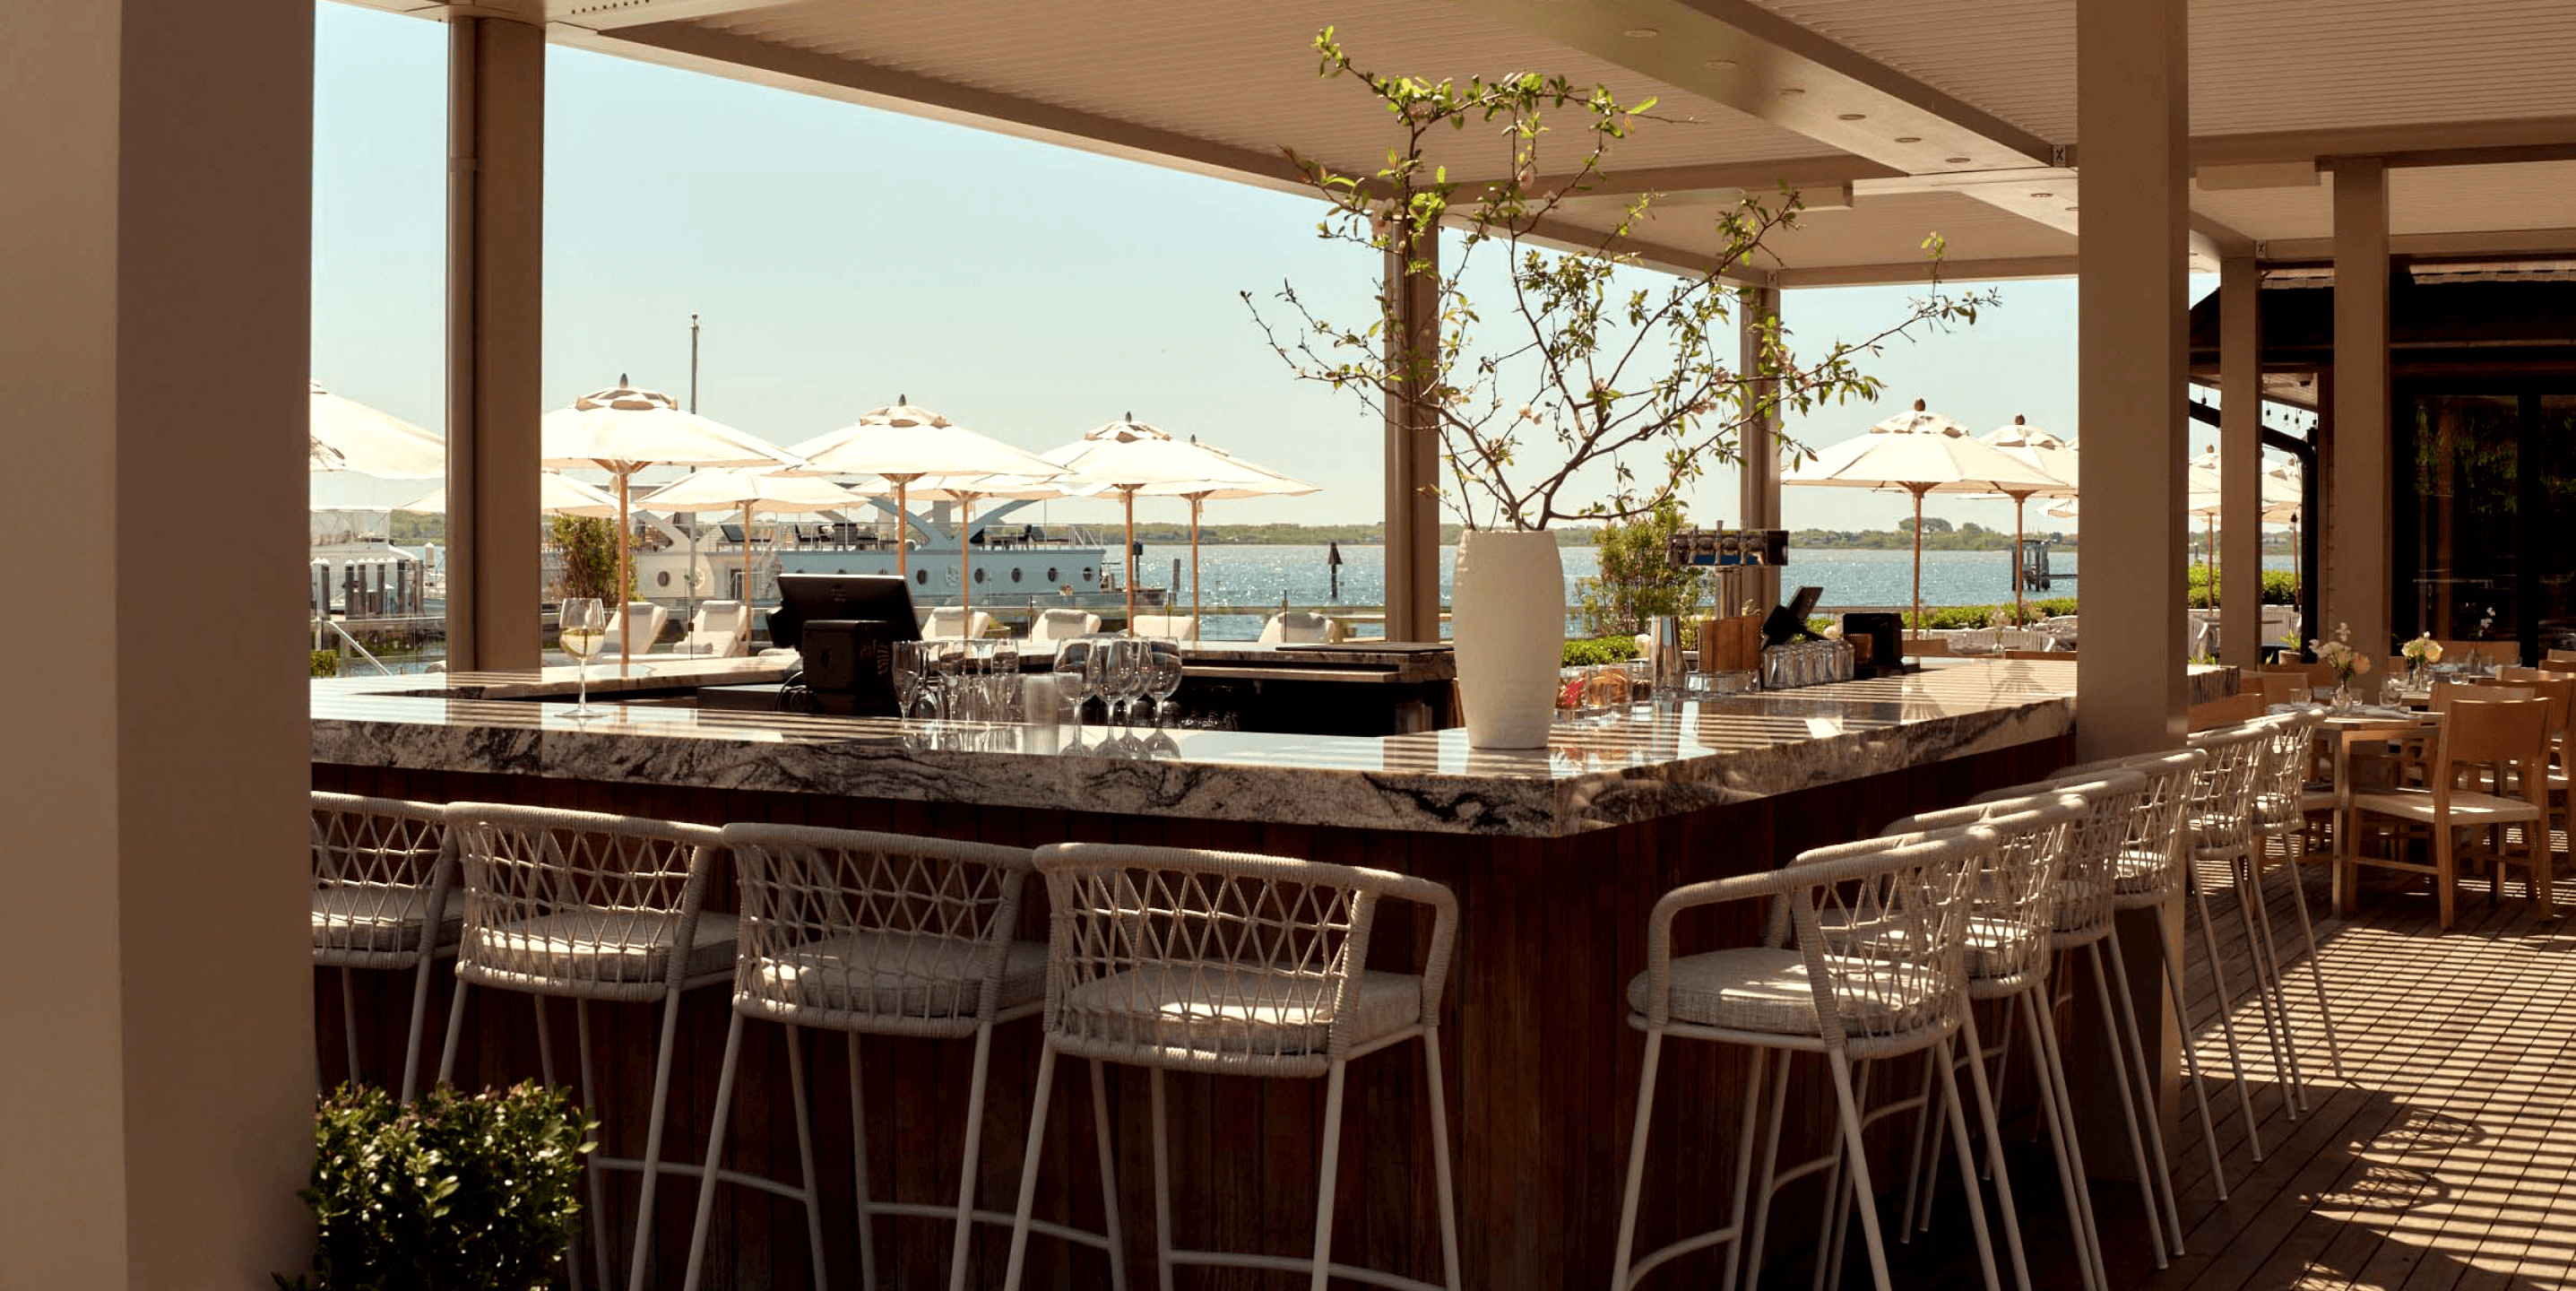 Beautiful long chairs positioned beside the bar counter provide a wonderful view of the sea.